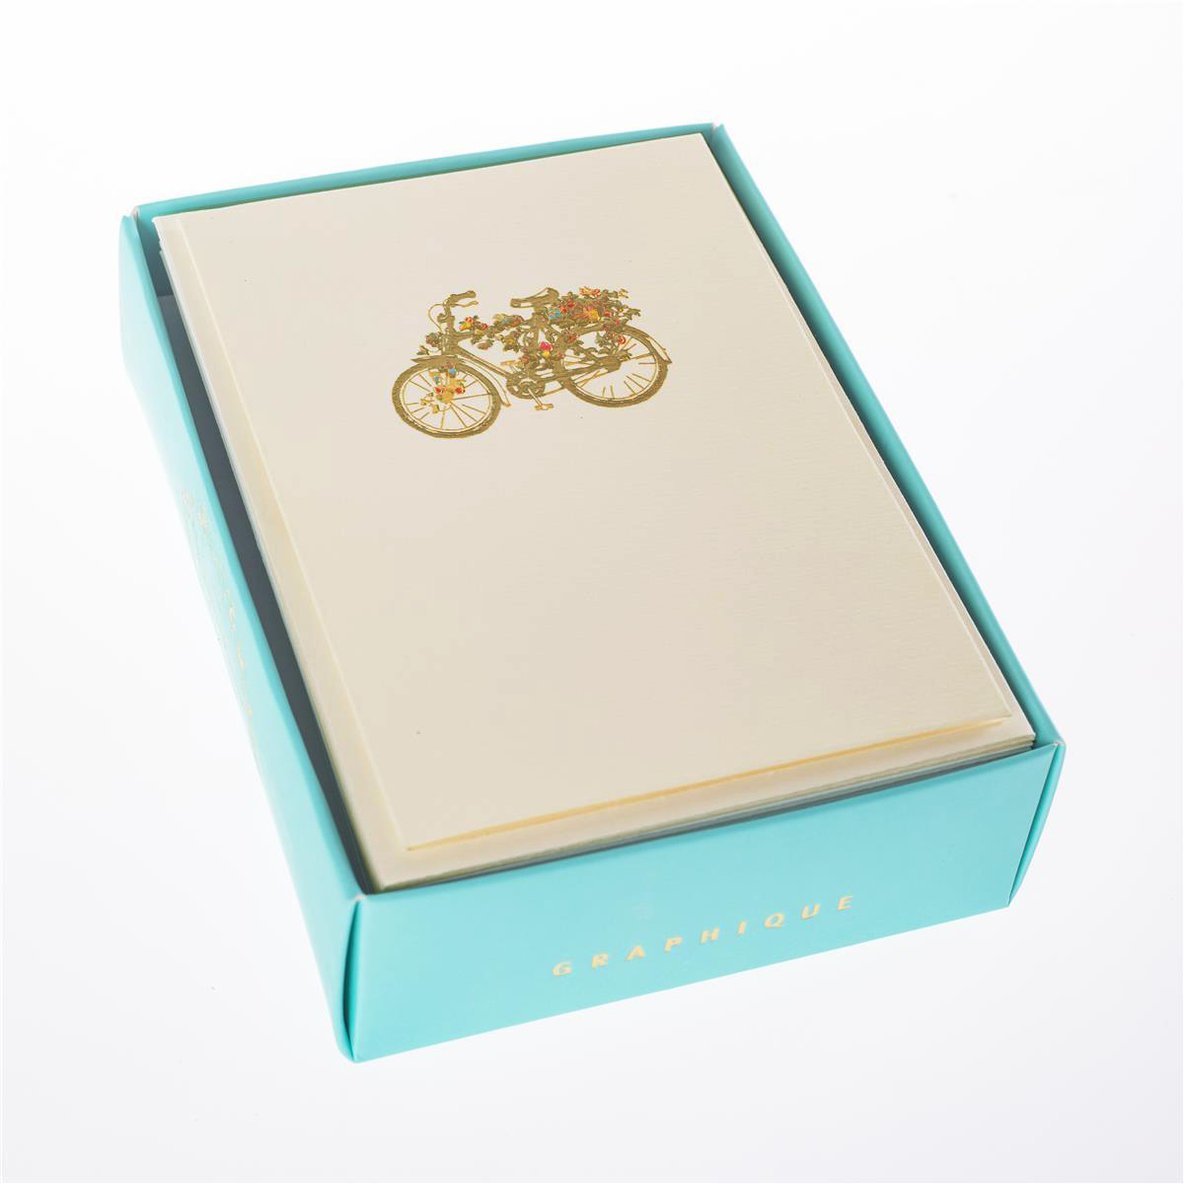 Graphique "Flower Bicycle" Cards